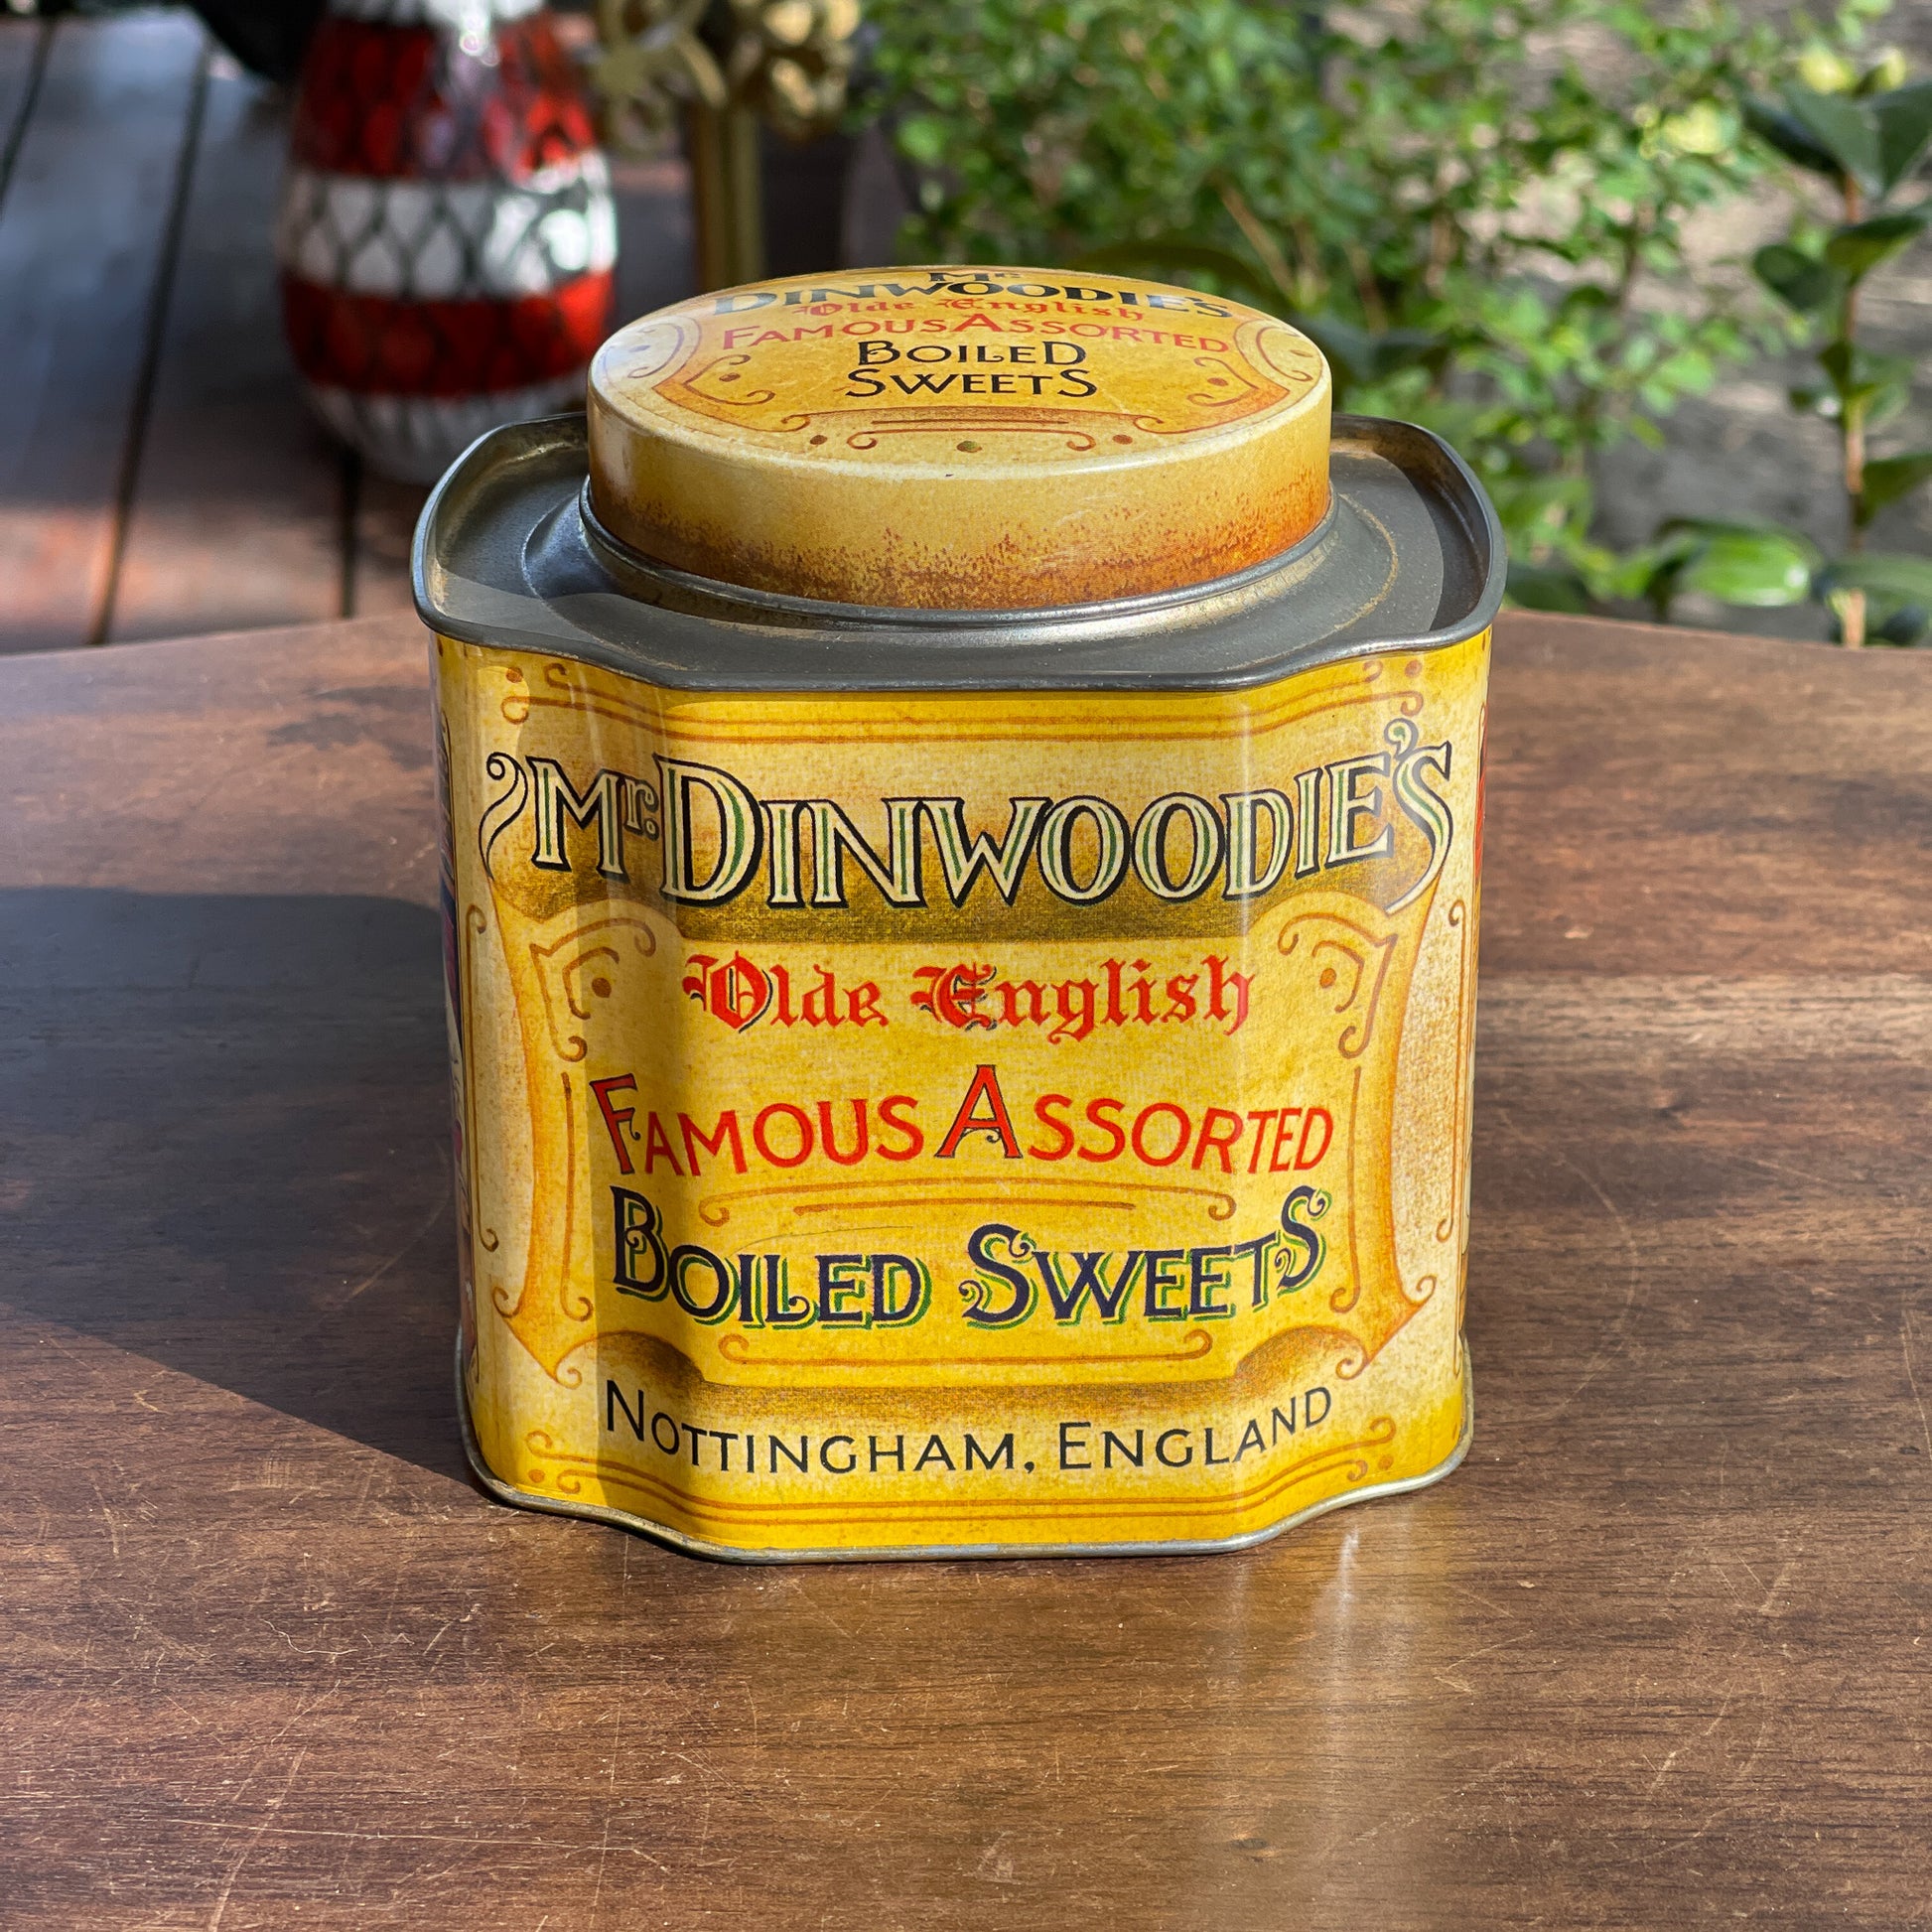 Mr. Dinwoodie's Old English Boiled Sweets Blik - Bamestra Curiosa